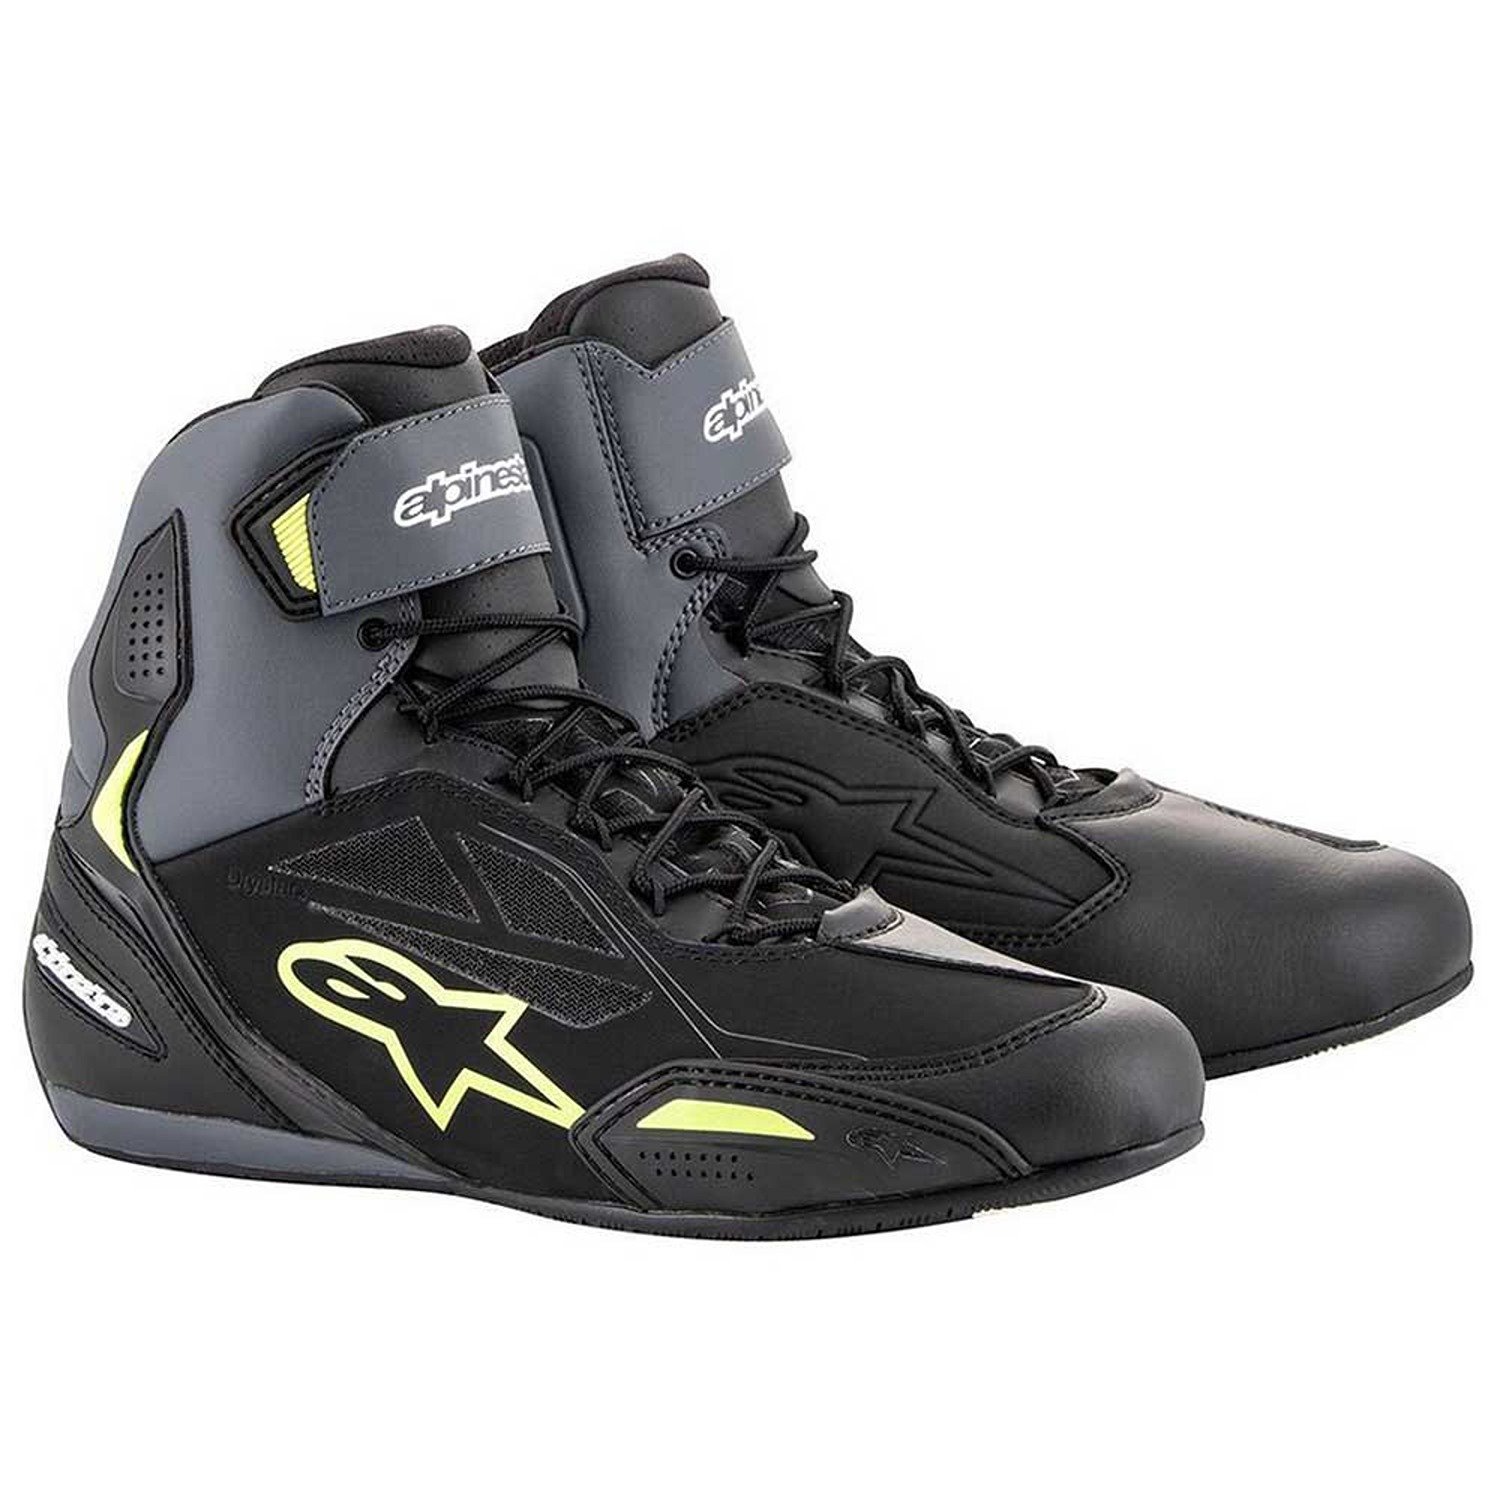 Image of Alpinestars Faster-3 Shoes Black Yellow Fluo Talla US 7